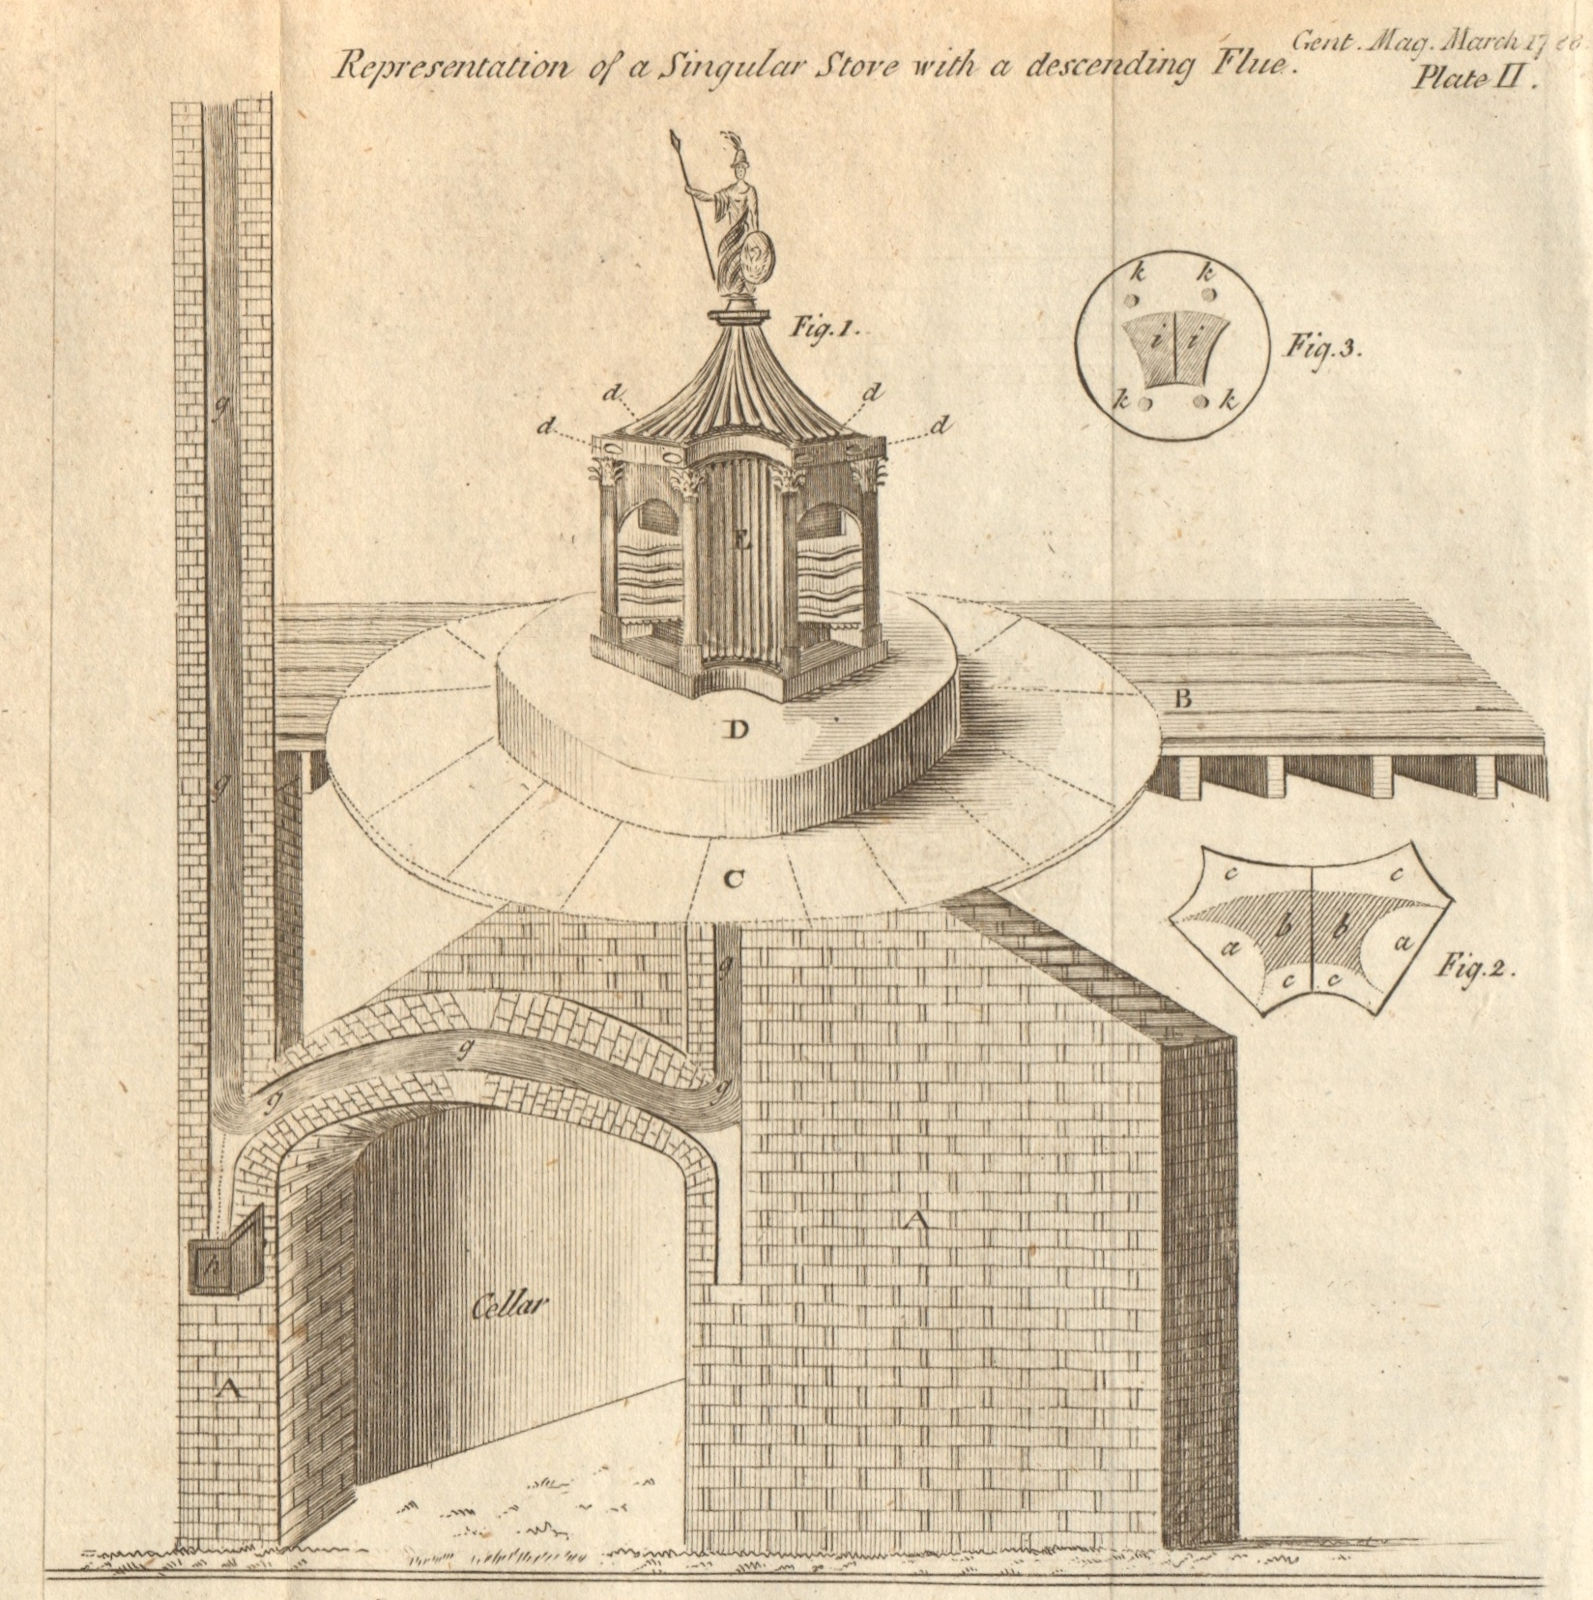 Representation of a singular stove with a descending flue 1788 old print